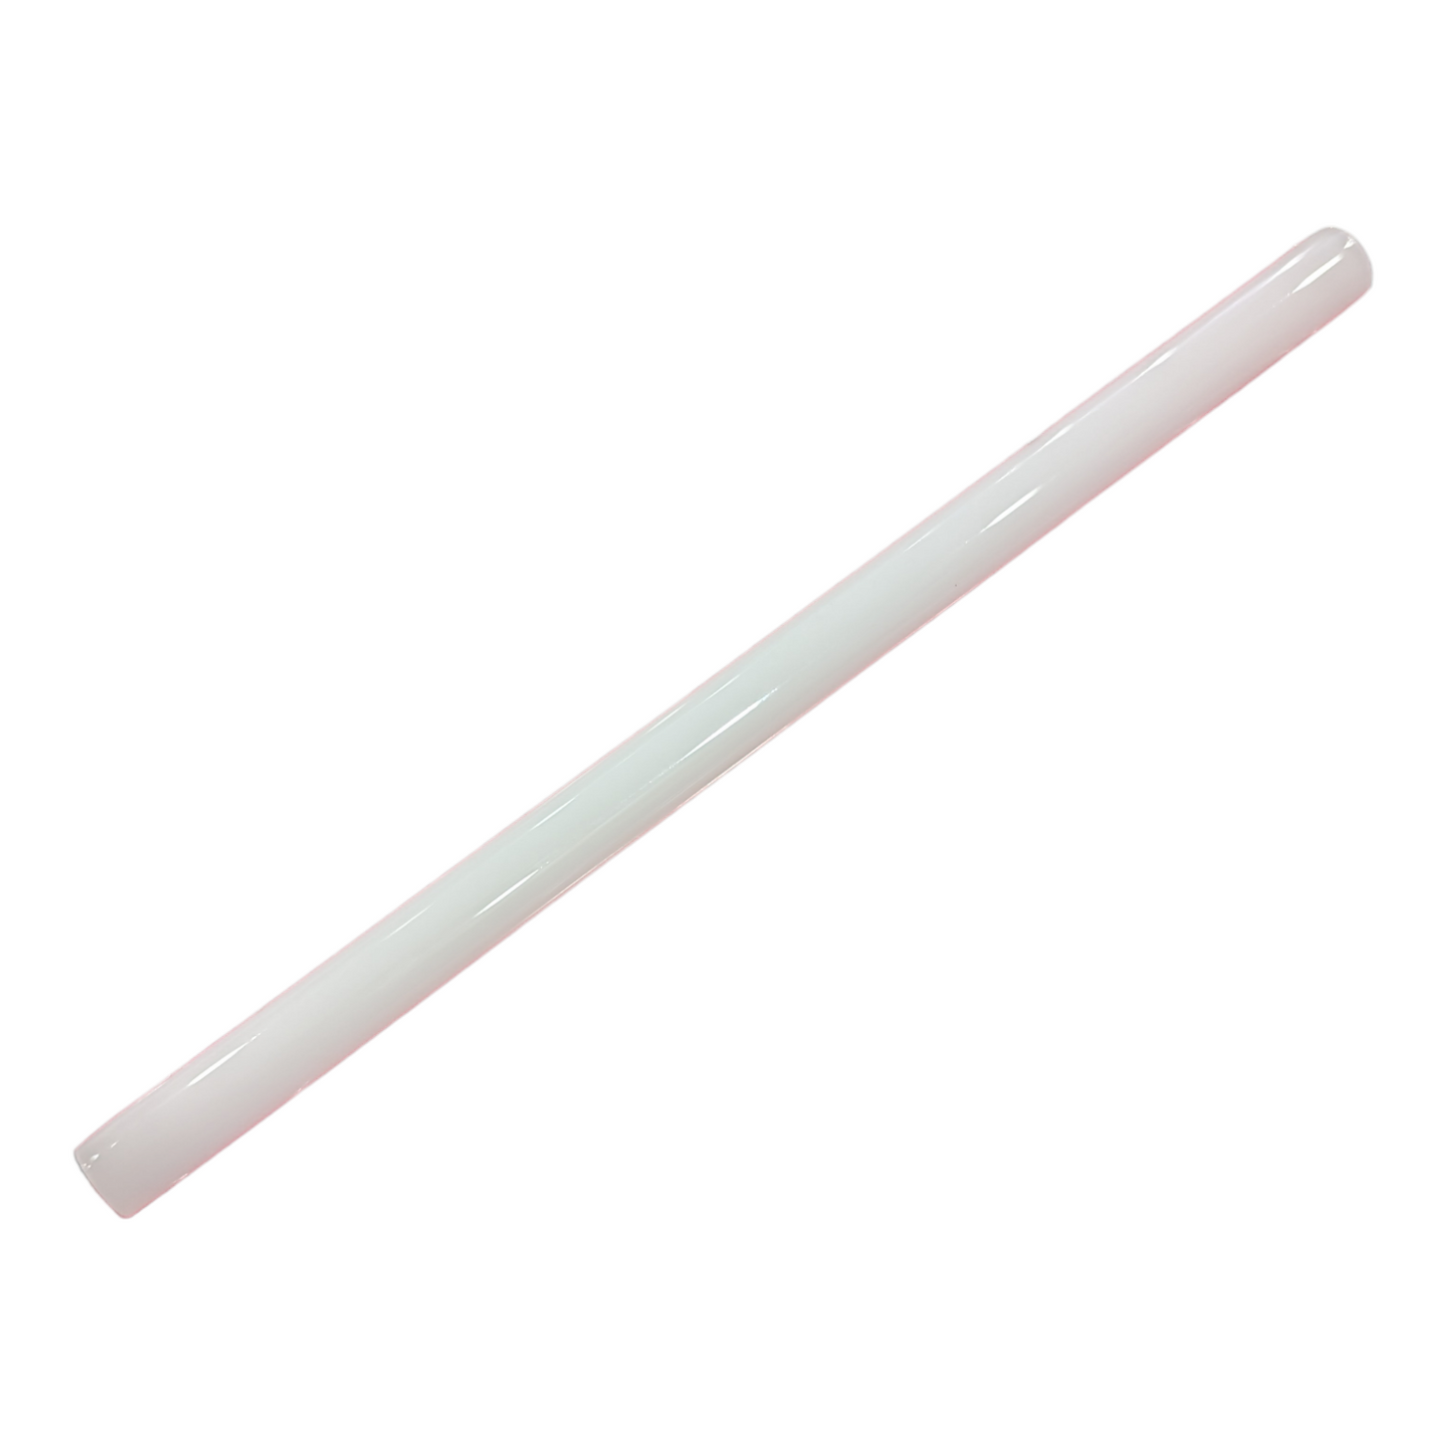 Handmade Reusable Straight Glass Straw by manic pixie dream squirrel